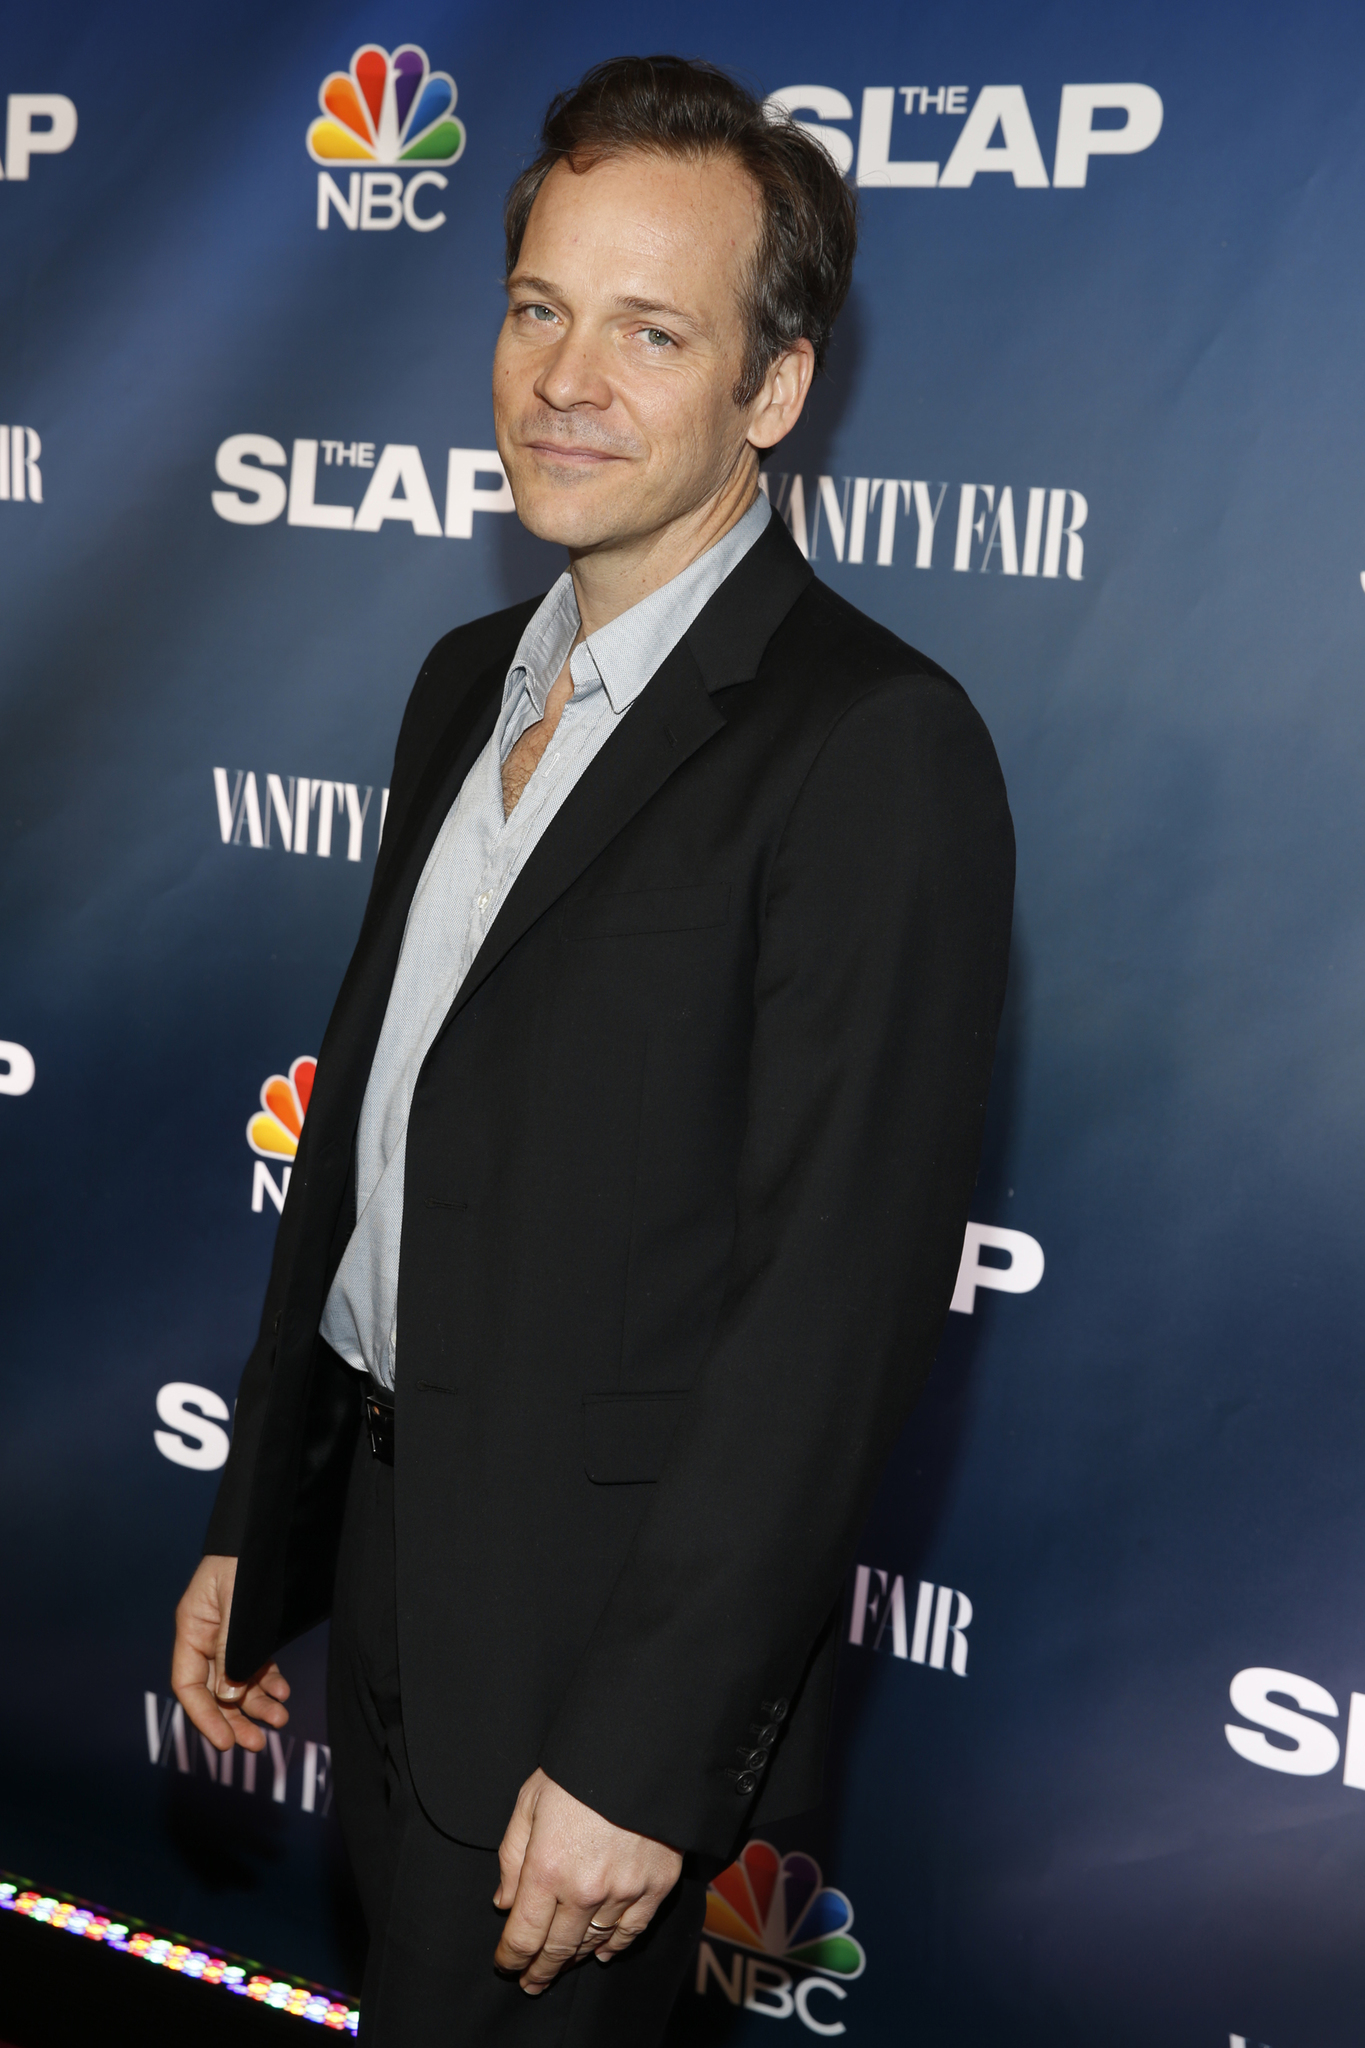 Peter Sarsgaard at event of The Slap (2015)